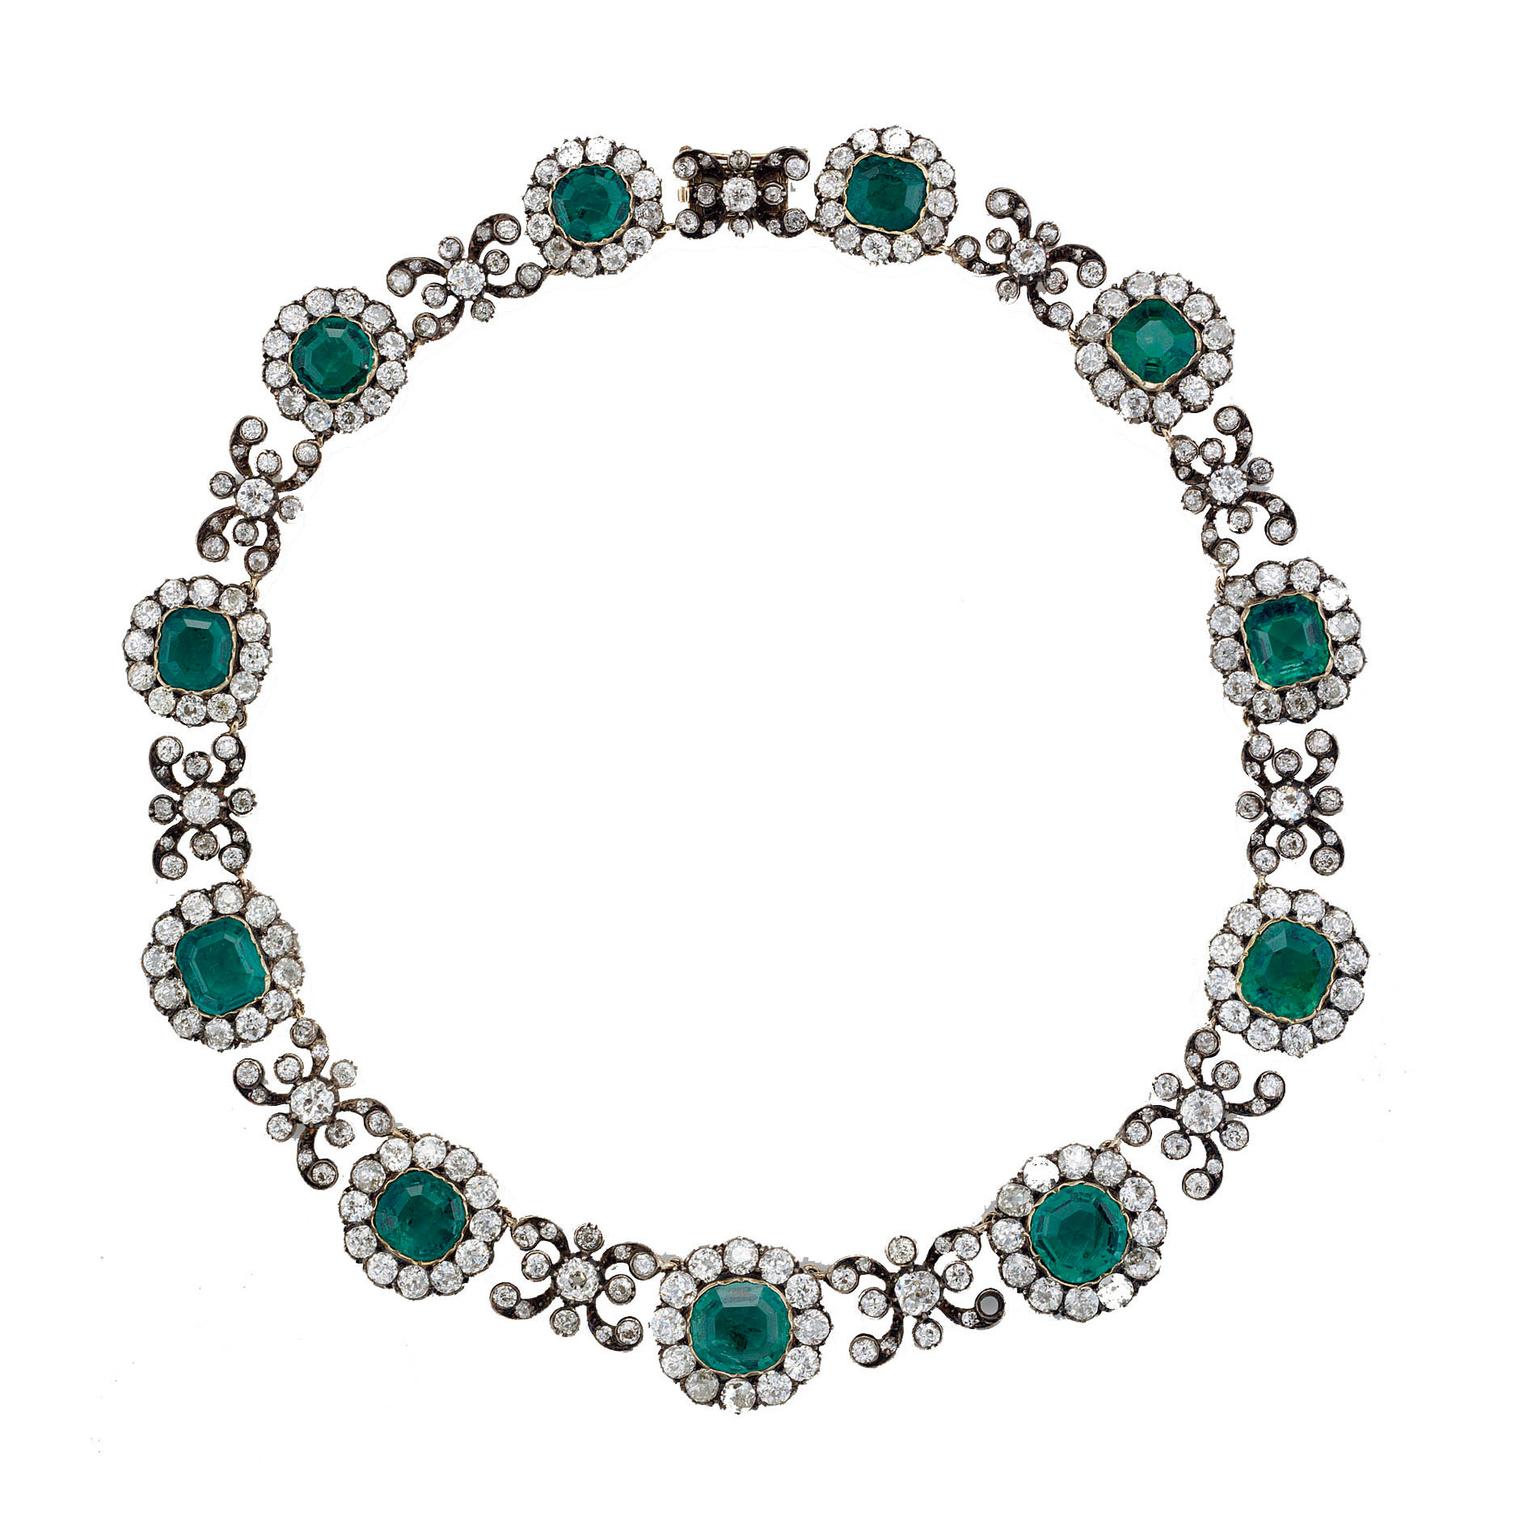 Stephen Russell Victorian emerald necklace